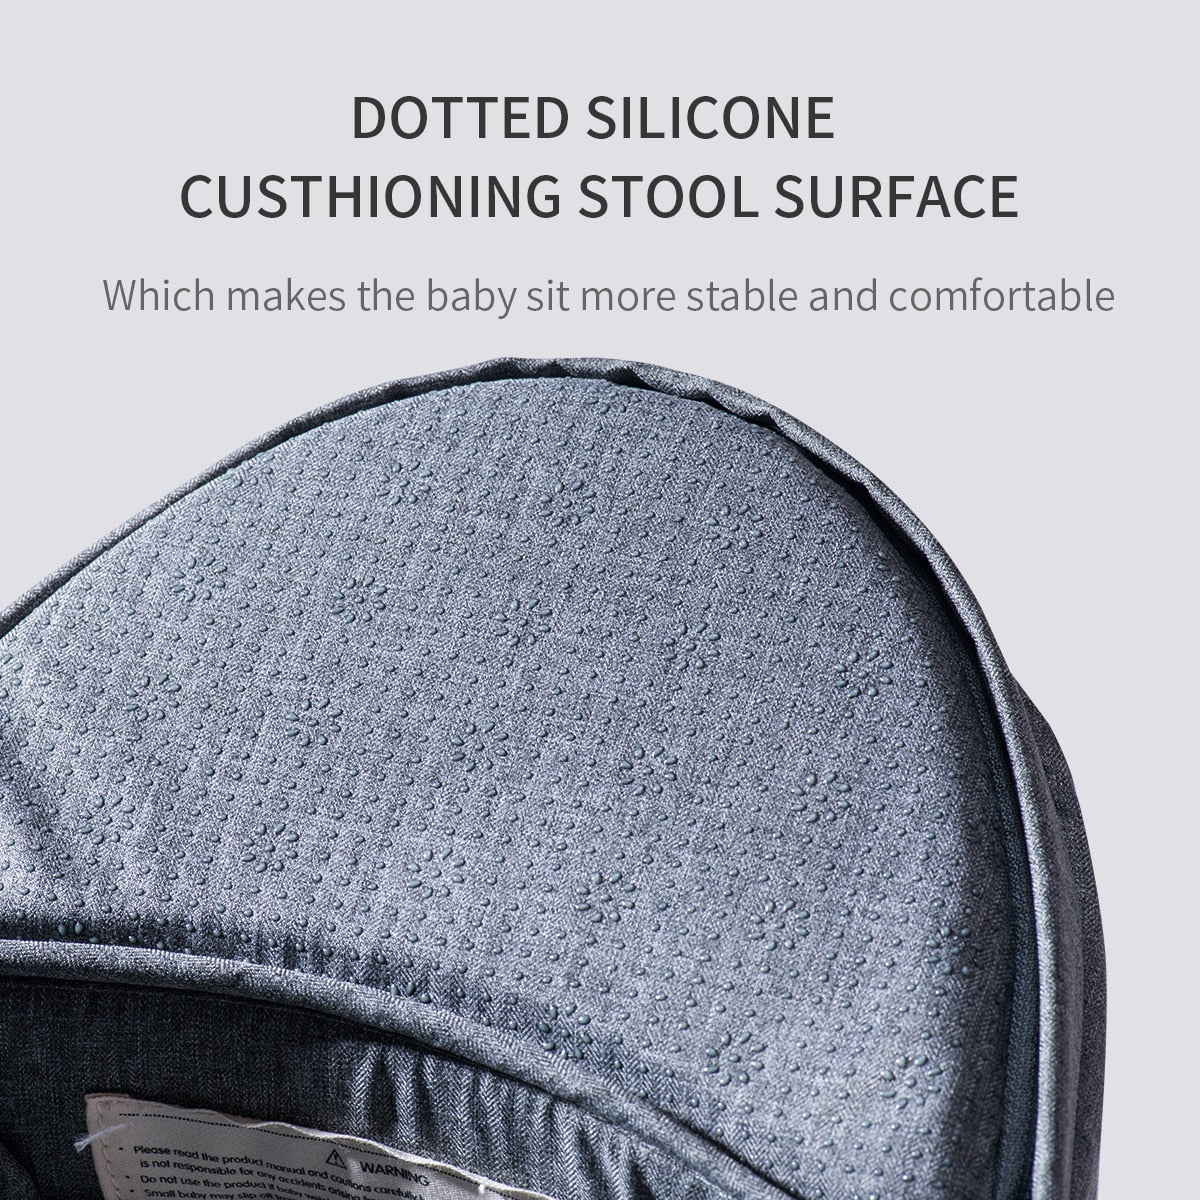 the baby carrier has dotted silicone cushioning stool surface to help your baby sit more comfortable and stable